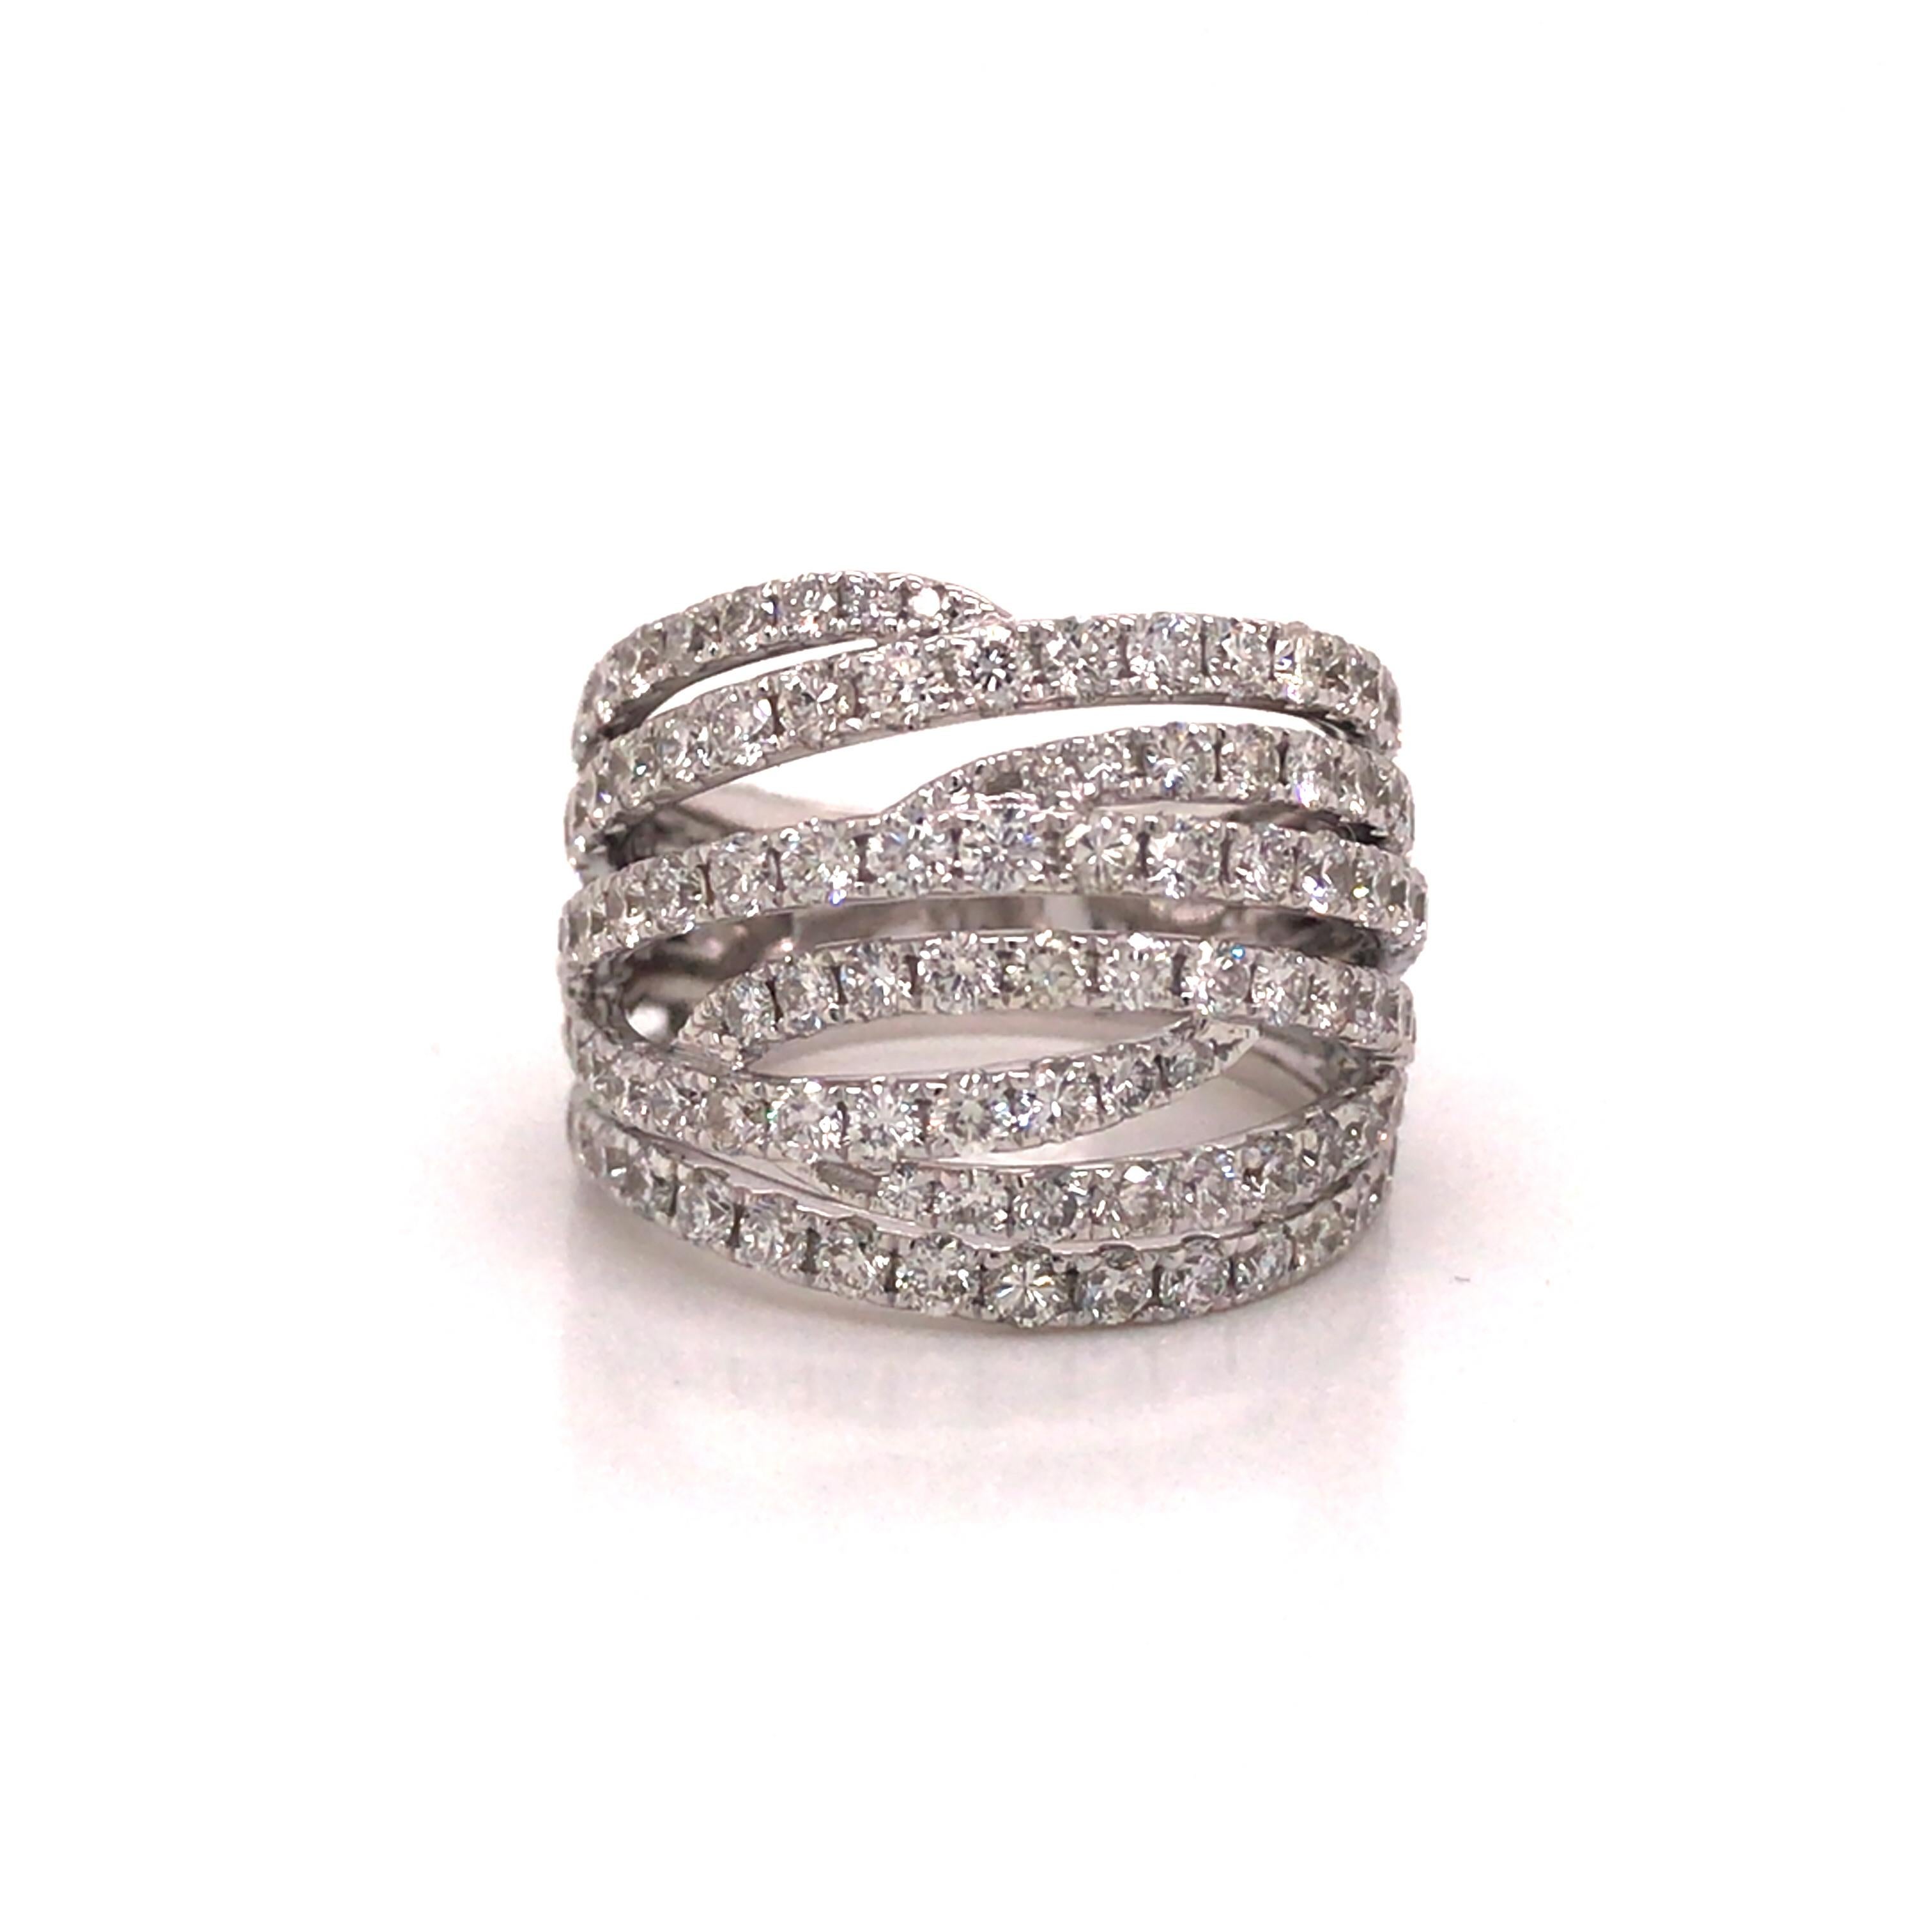 Diamond Crossover Band in 18K White Gold.  Round Brilliant Cut Diamonds weighing 3.05 carat total weight, G-H in color and VS-SI in clarity are expertly set.  The Band measures 5/8 inch in width.  Ring size 6. 9.33 grams.